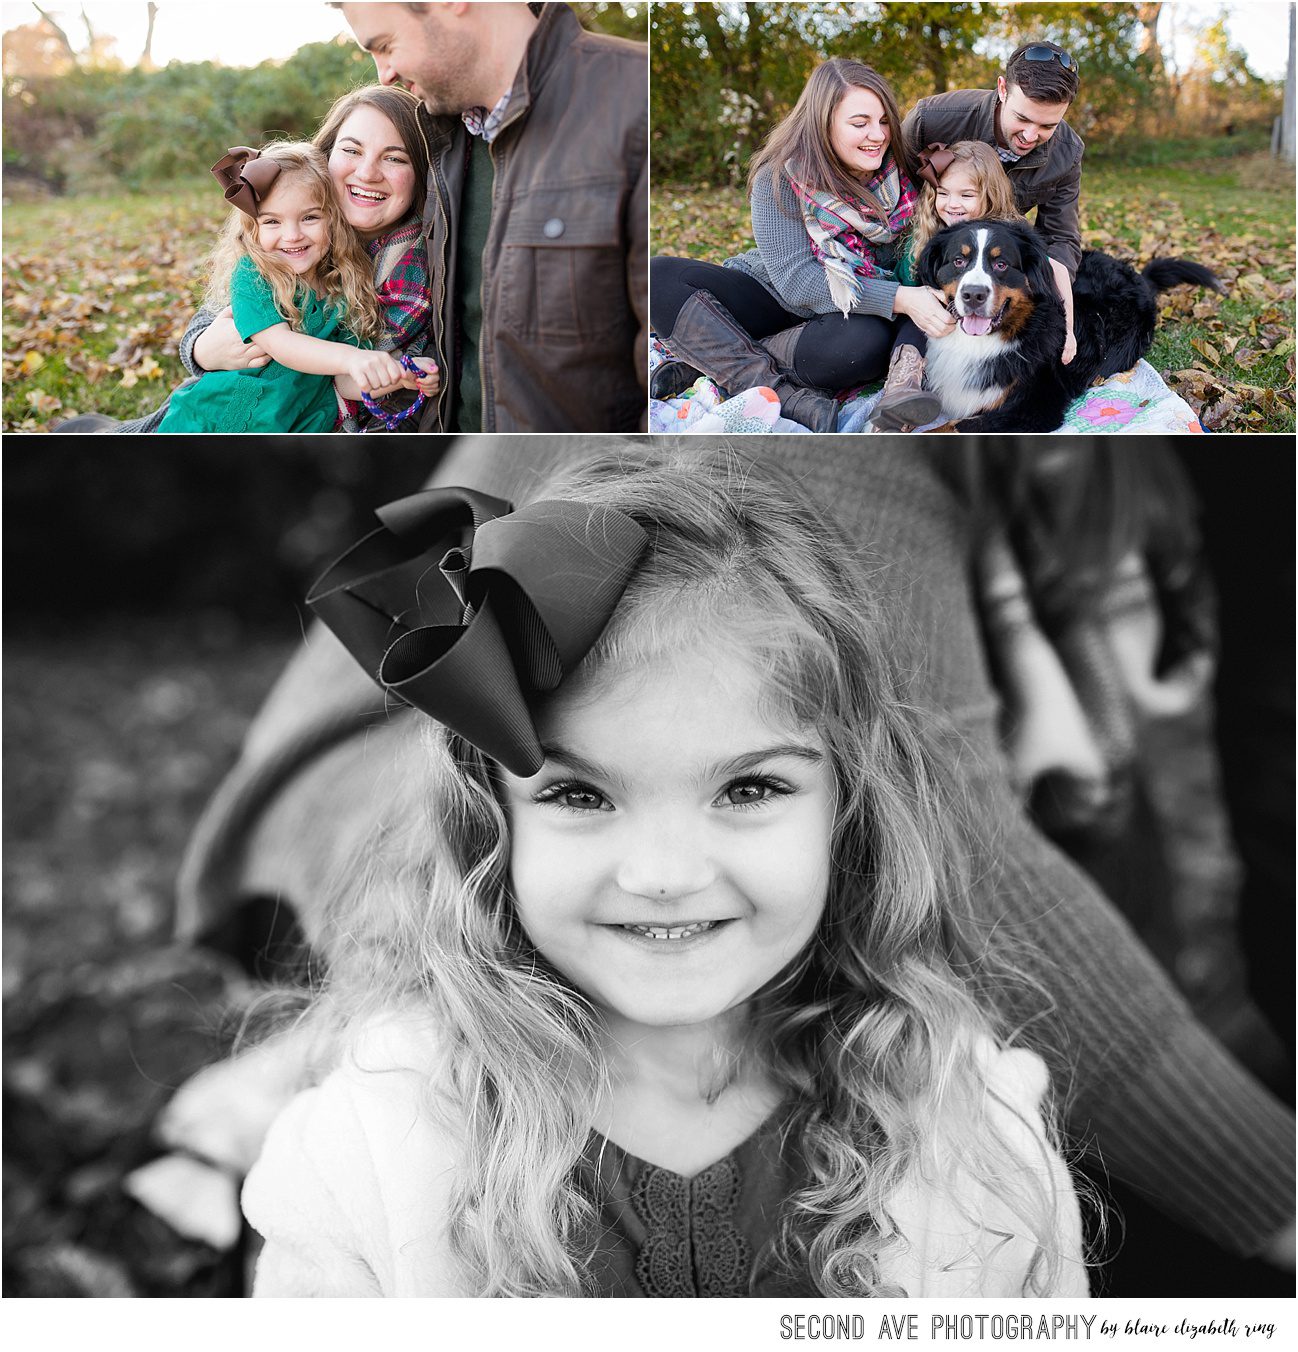 Fellow March of Dimes family with their Bernese Mountain Dog, photographed by DC family photographer at a beautiful natural location just before sunset.